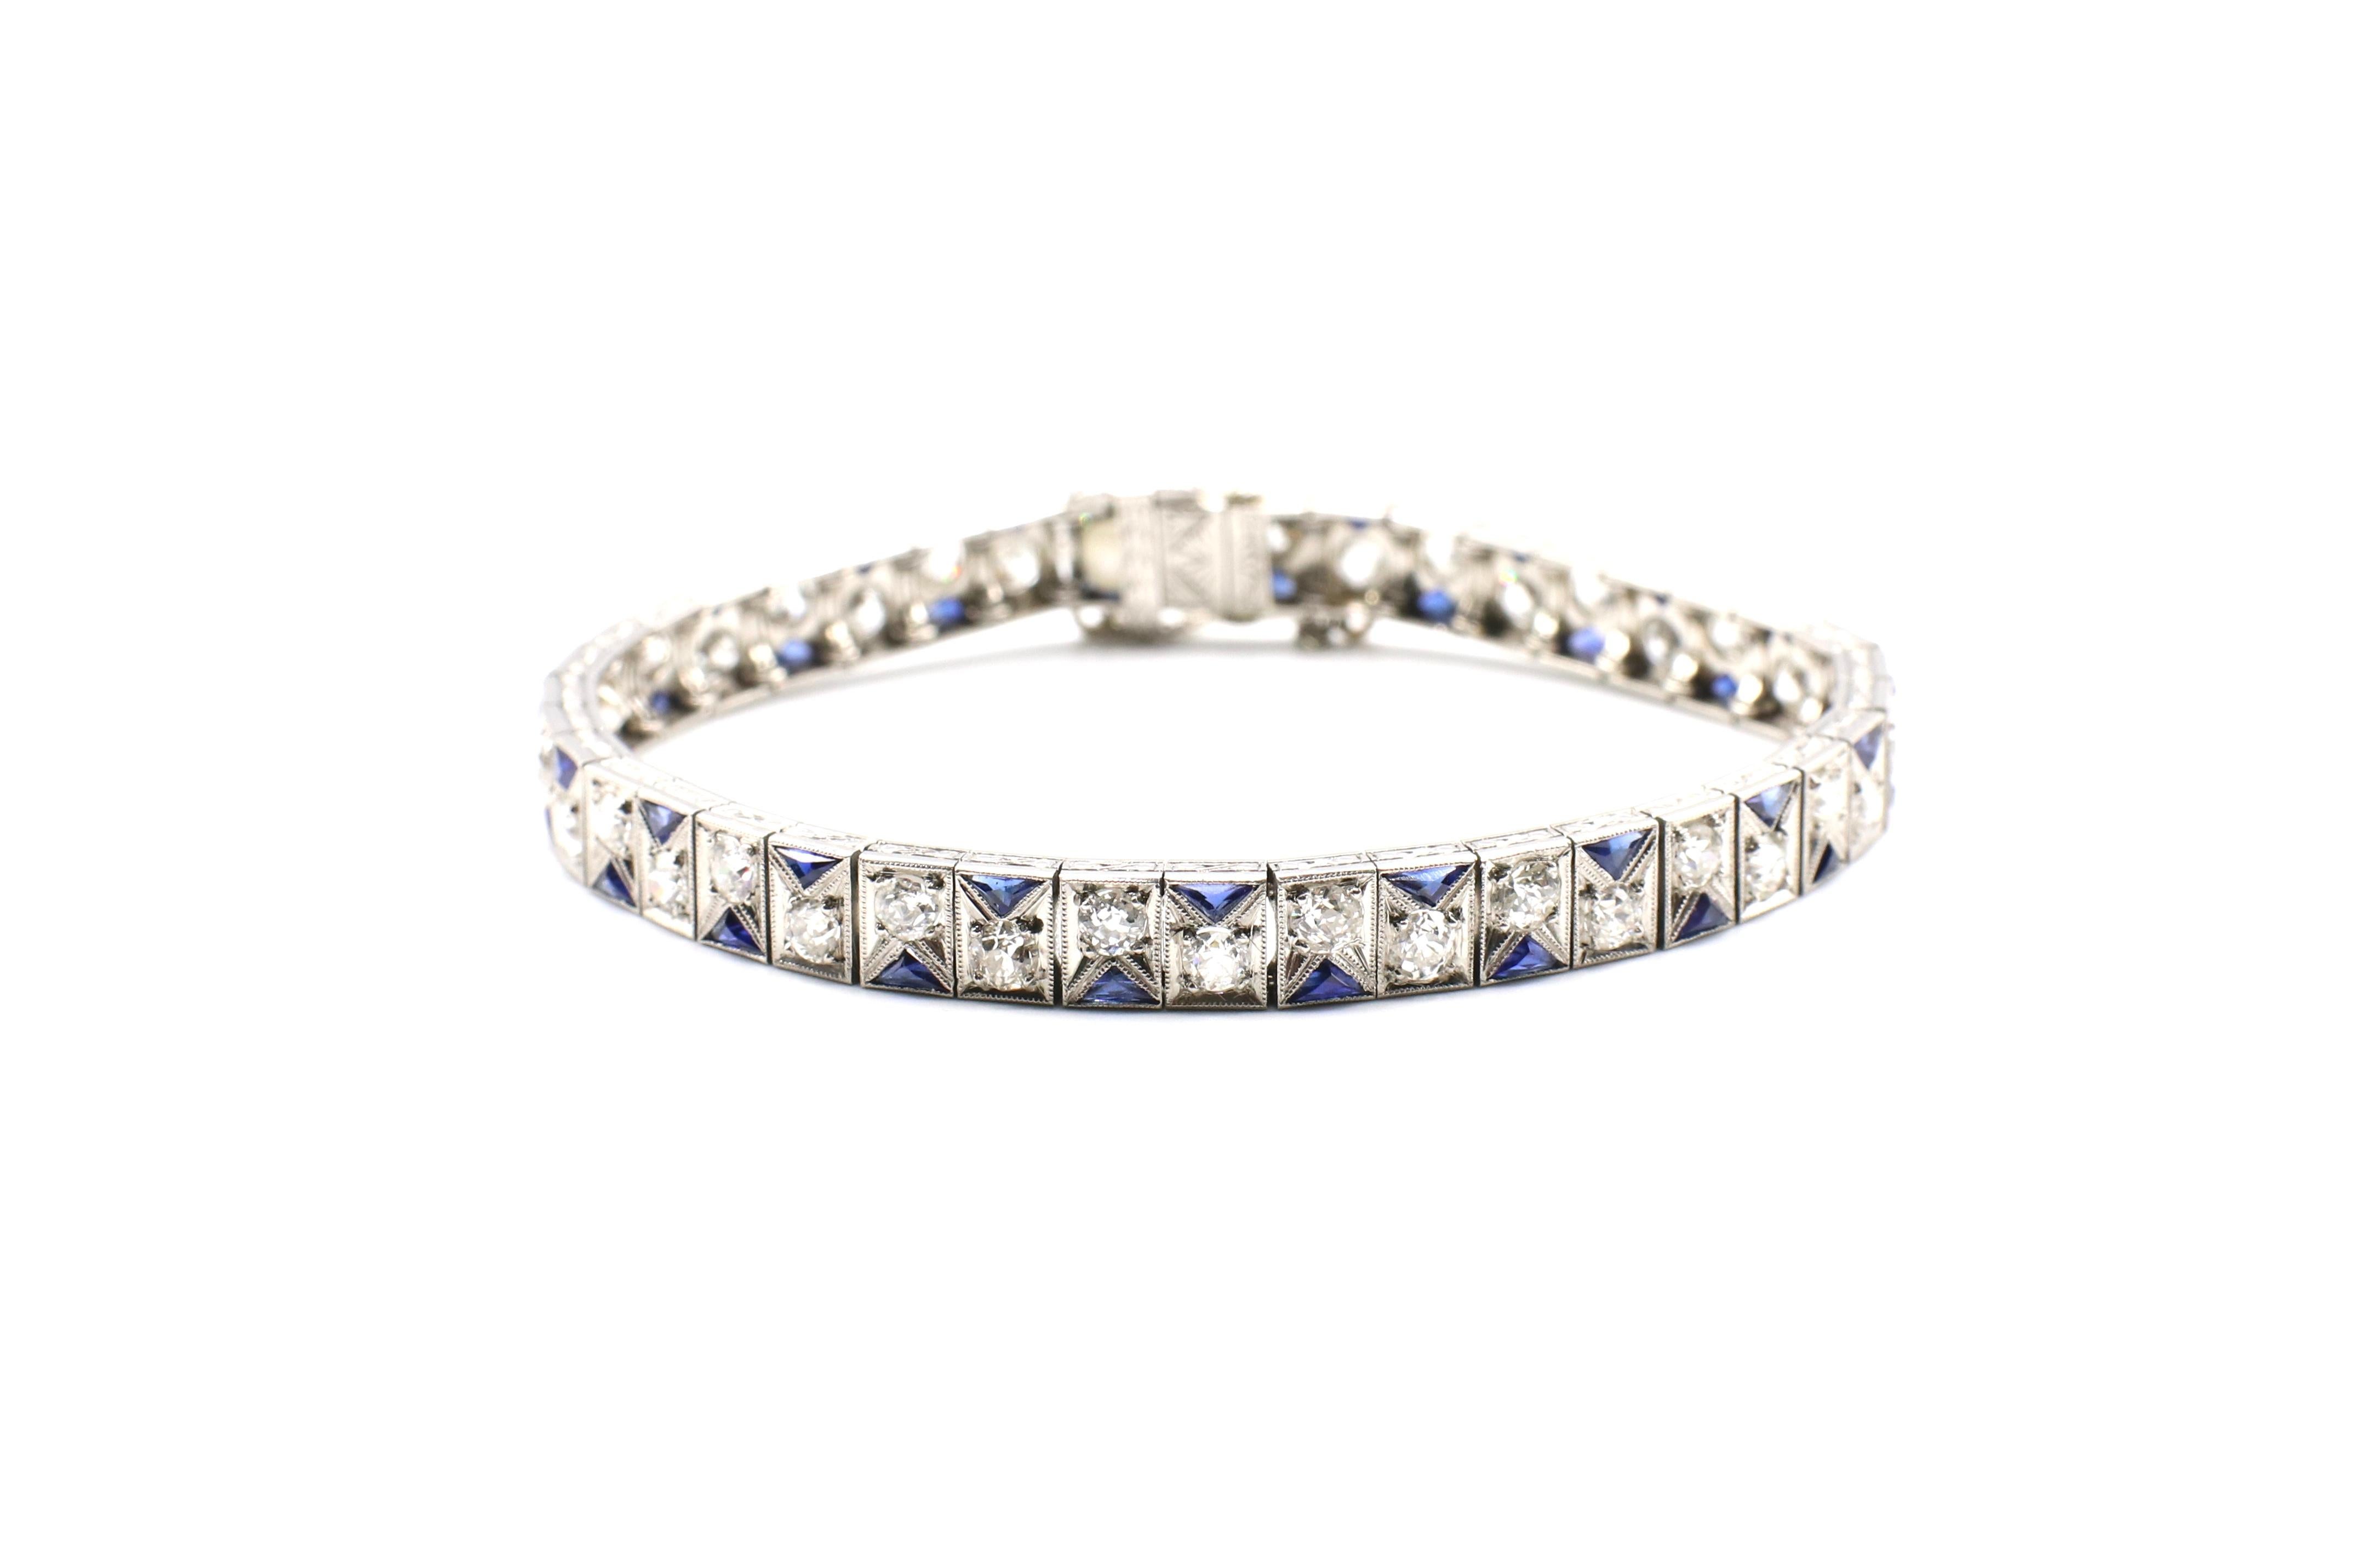 Art Deco platinum diamond & sapphire bracelet with approximately 3.5 carats of Old European cut and mine cut diamonds, G-H SI-I1,  delicate etching design on the sides and clasp. A safety chain connects the bracelet for security. The bracelet is